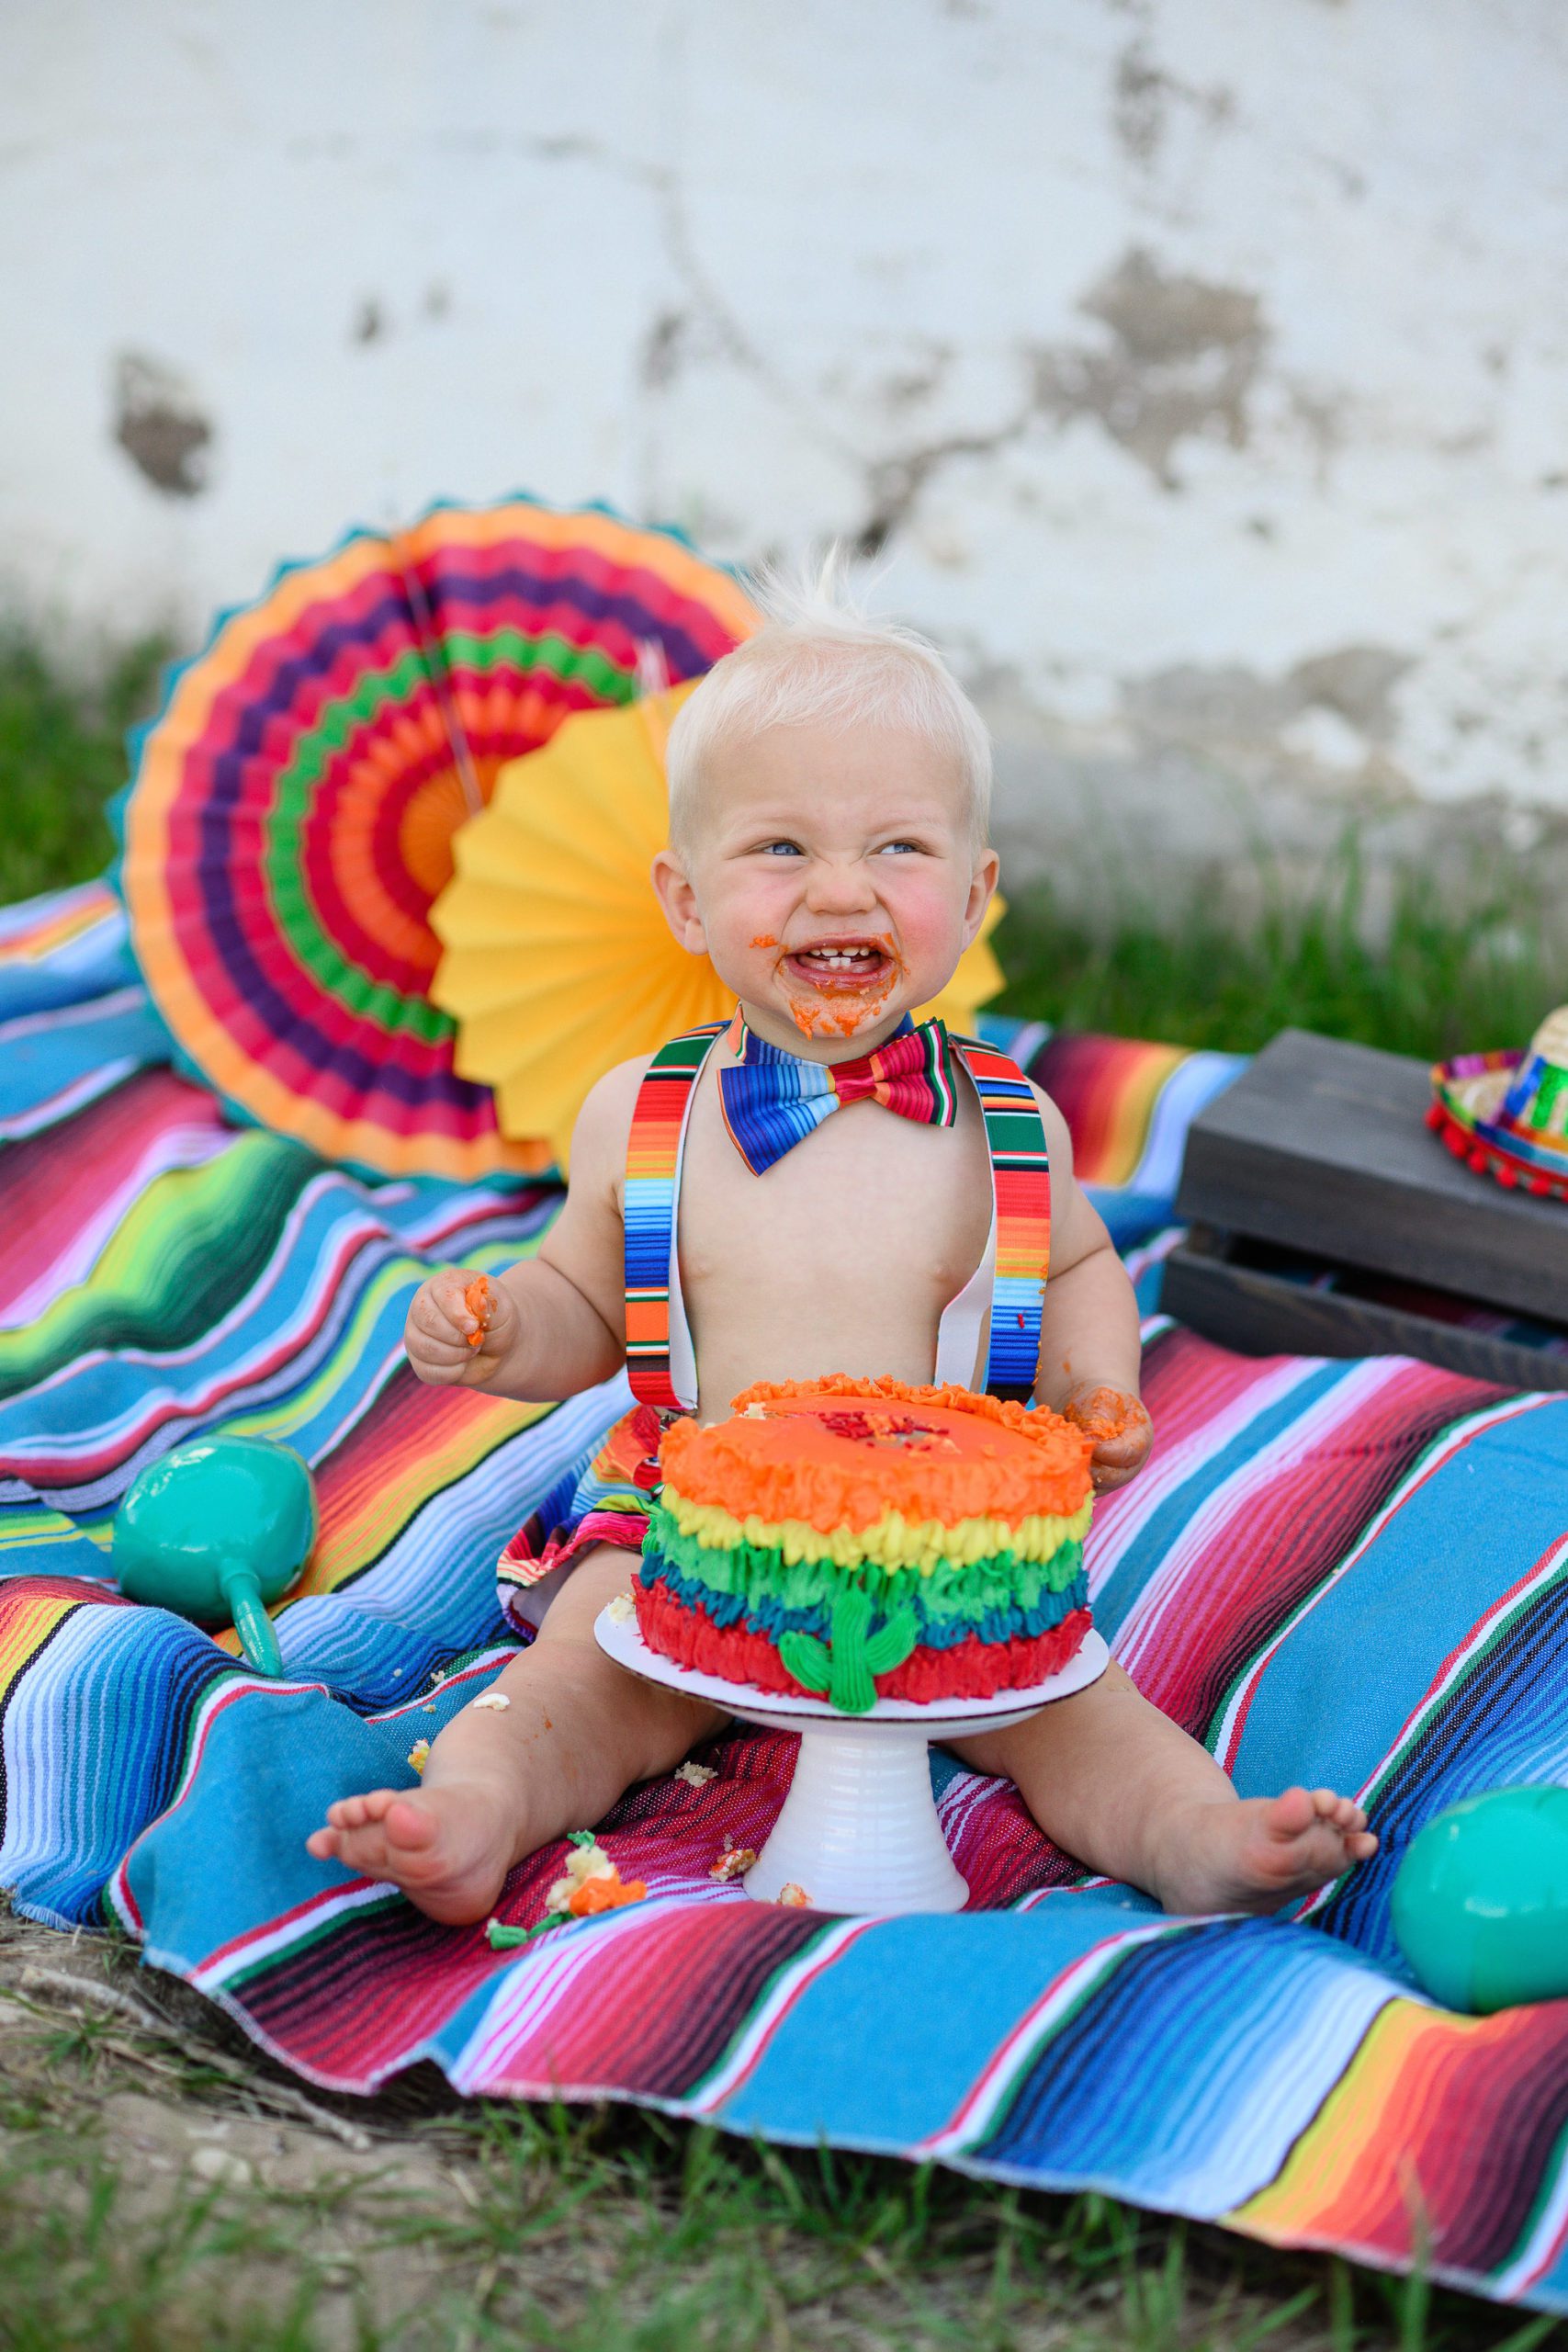 Denver Photographer captures a one year old boy sitting on a brightly colored Mexican blanket with fiesta props all around while he eats a brightly colored cake.